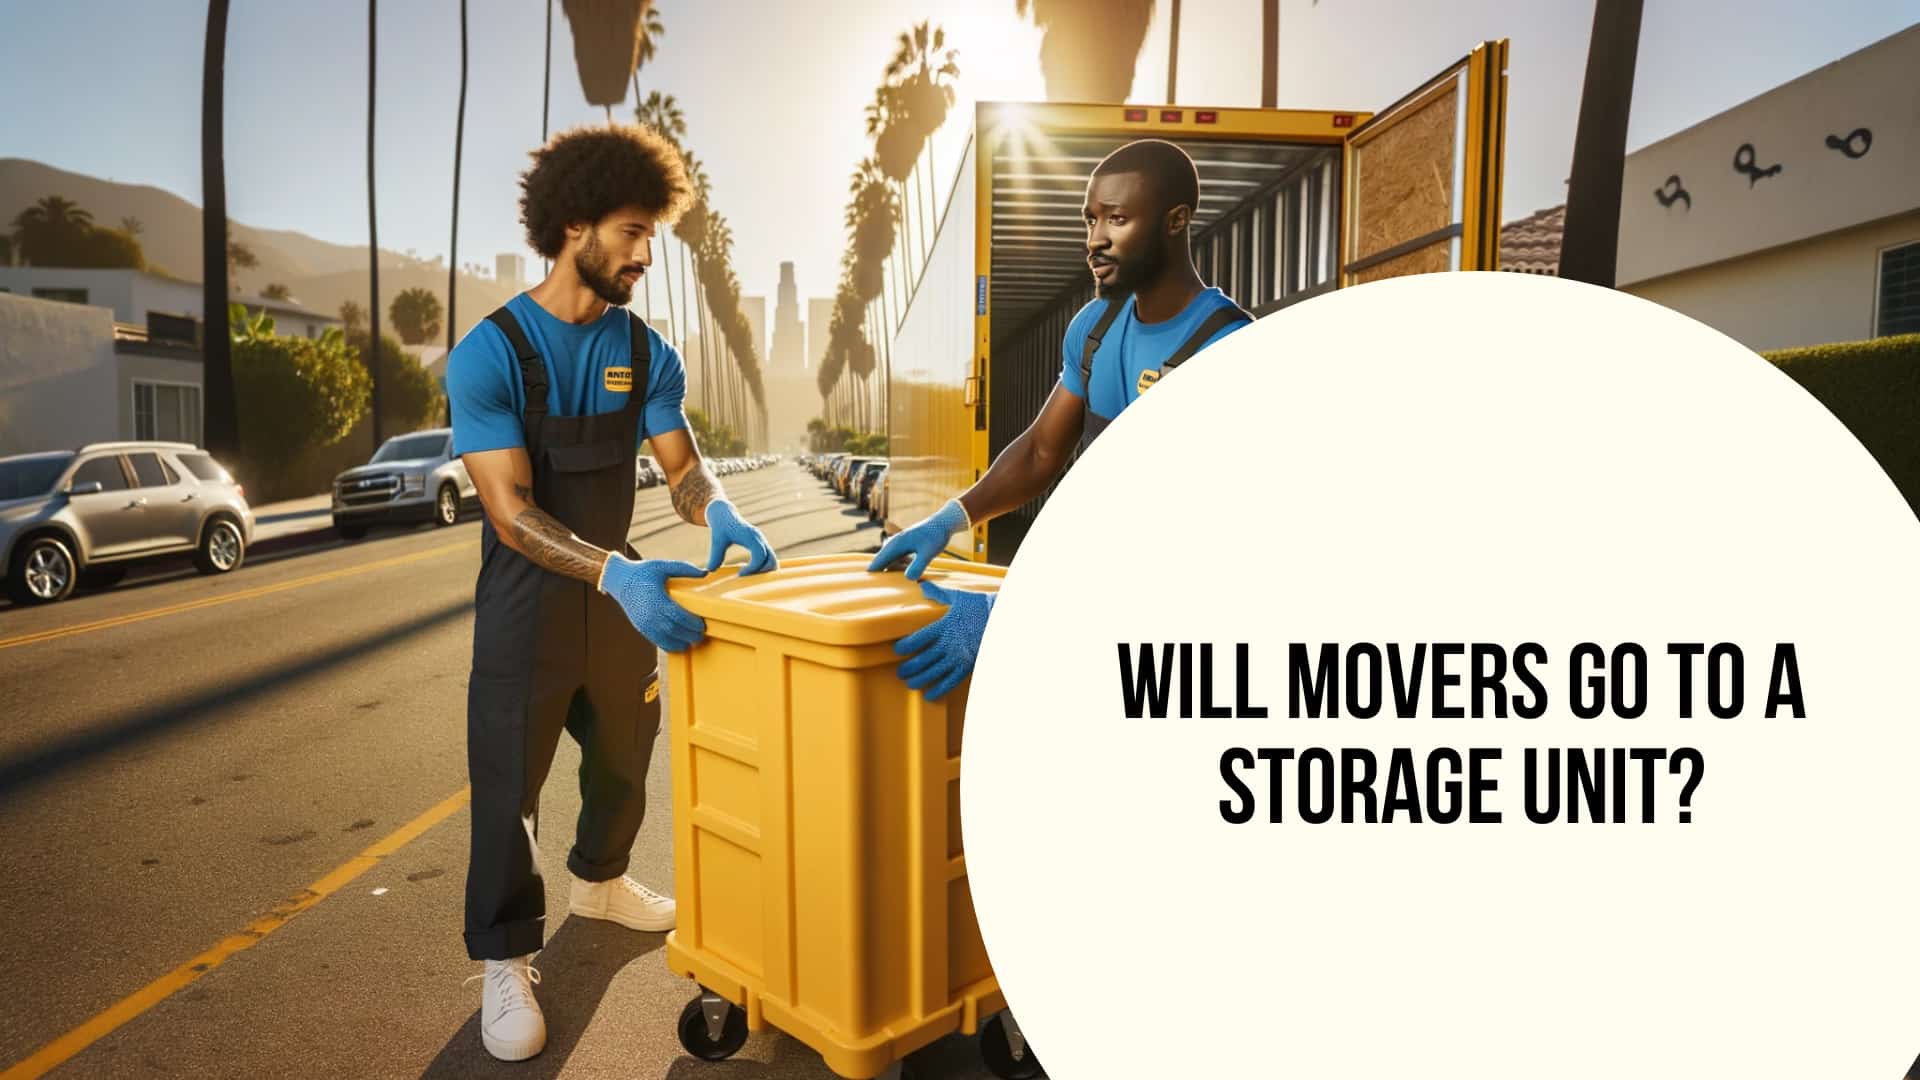 Will Movers Go to a Storage Unit